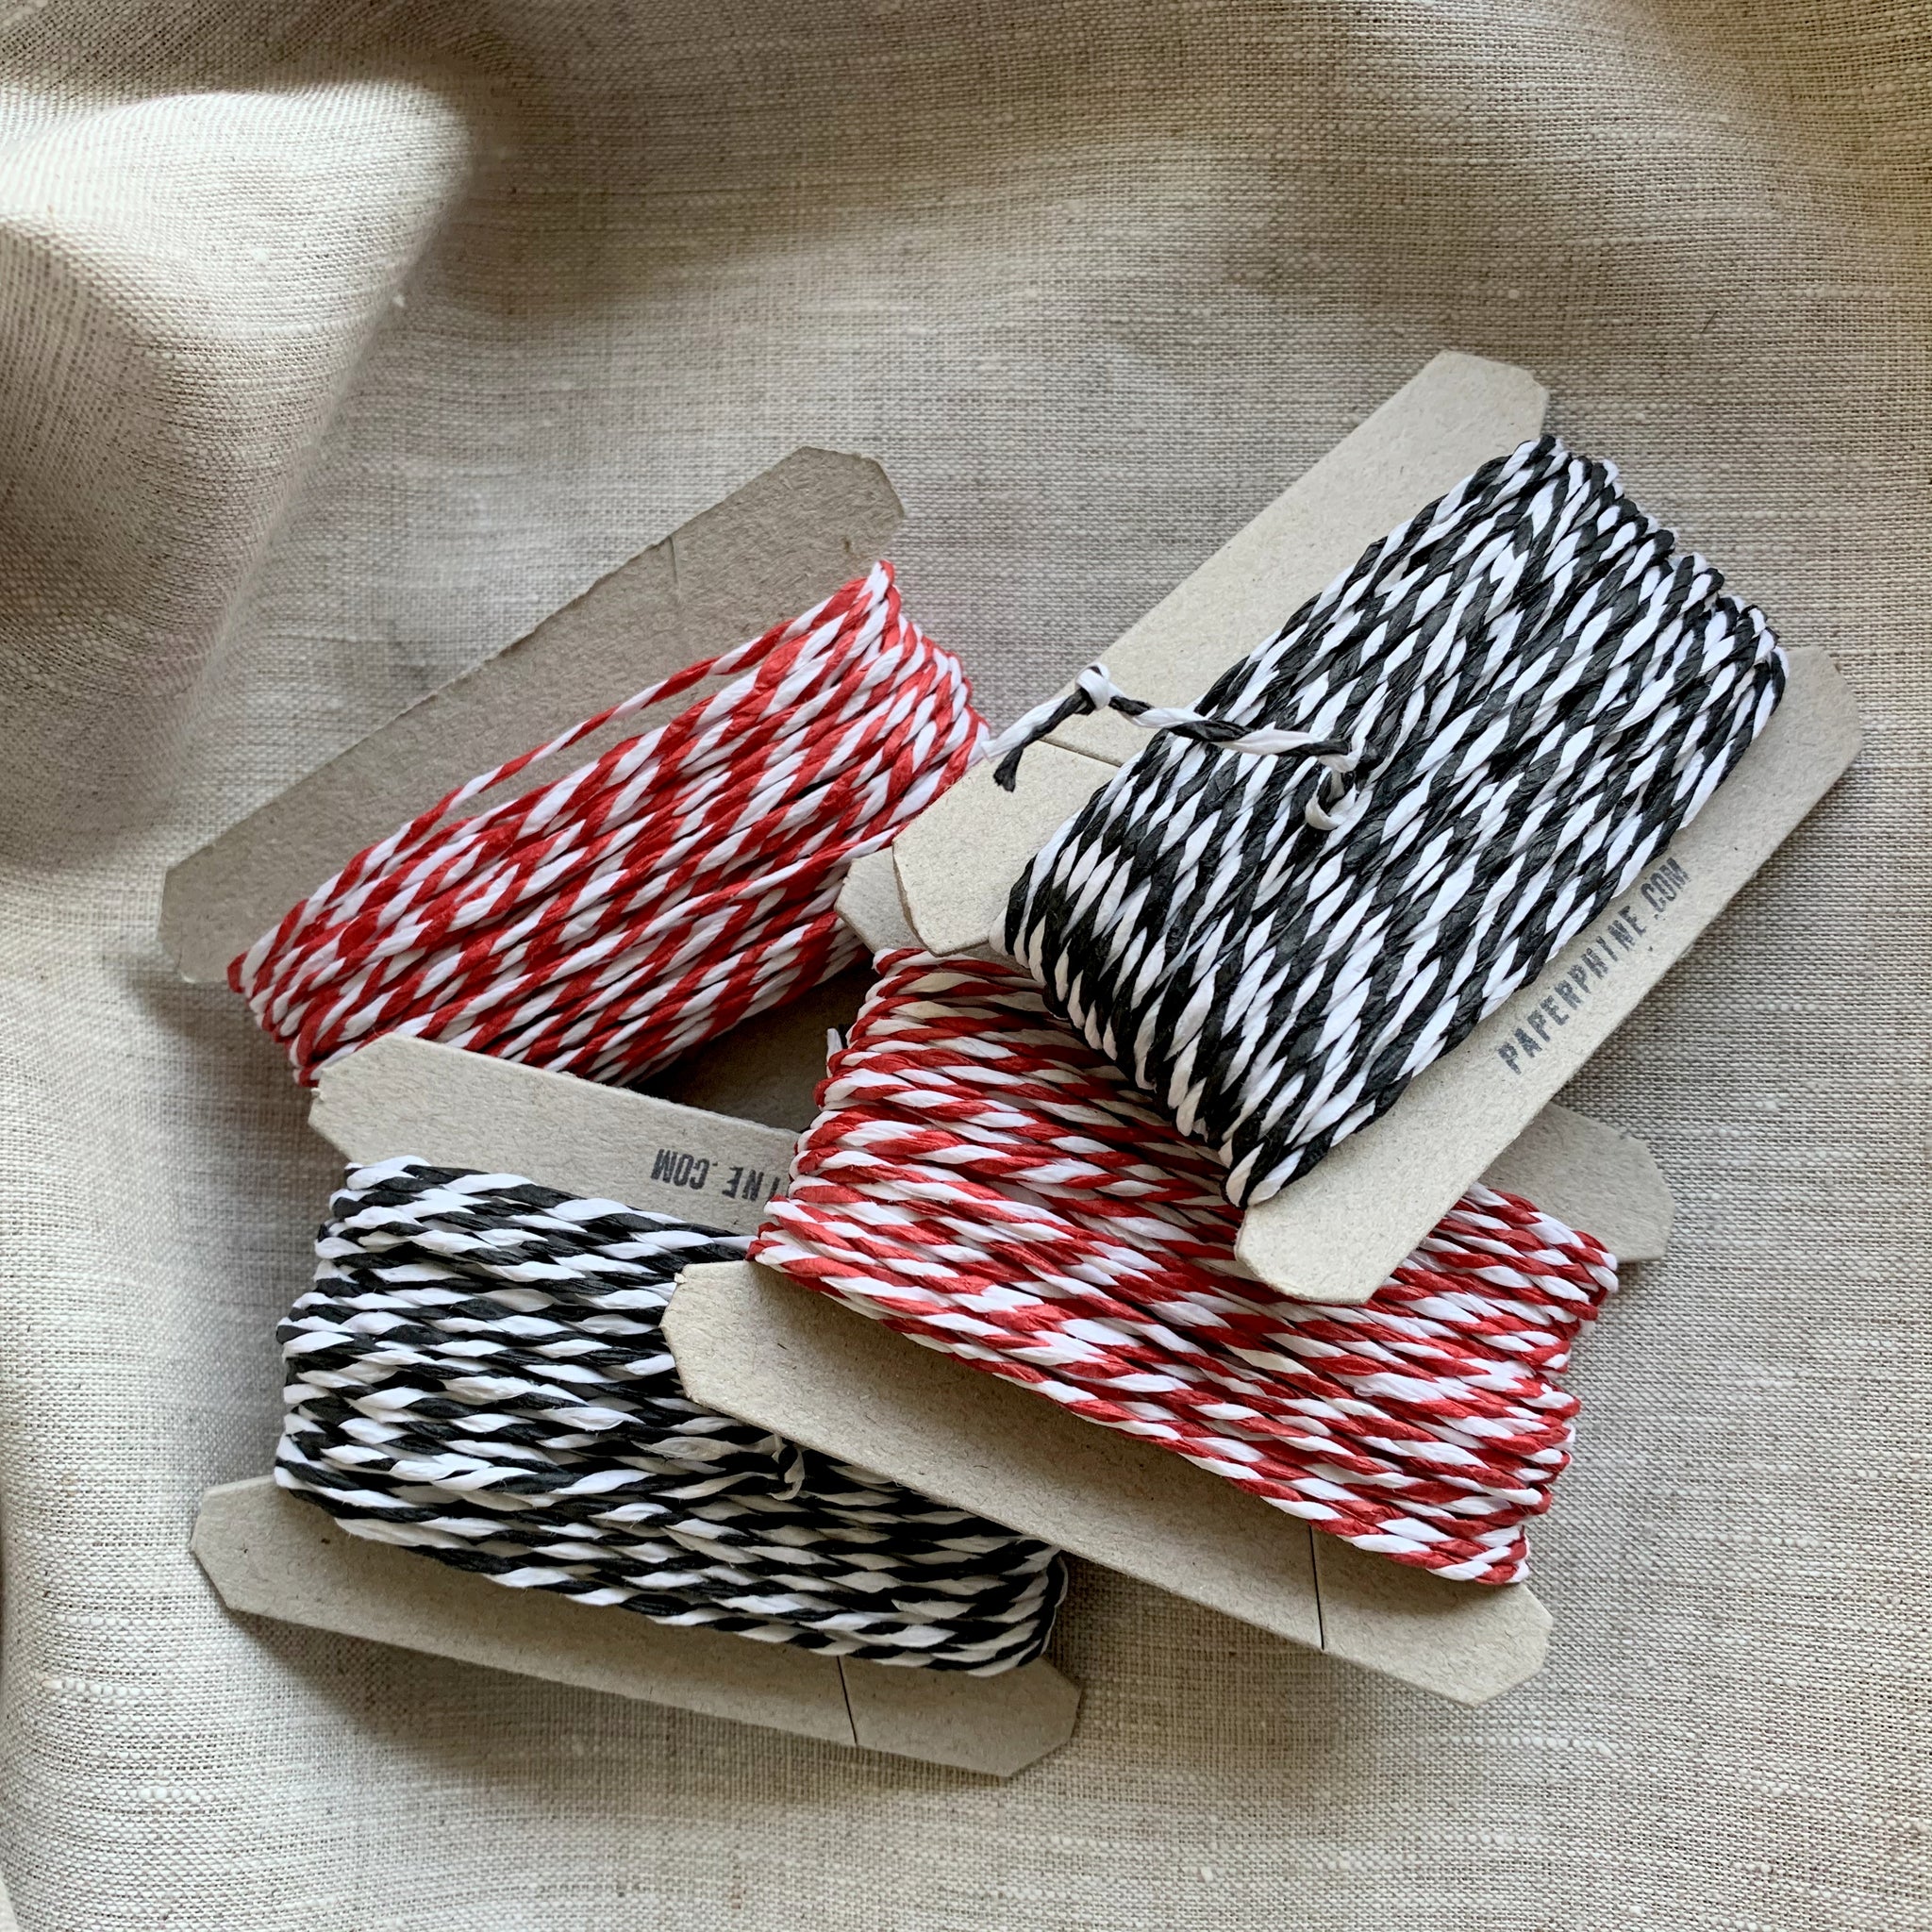 PaperPhine Set of 4 Paper Twine on Cardboard Coils - Twisted Red and White / Black and White